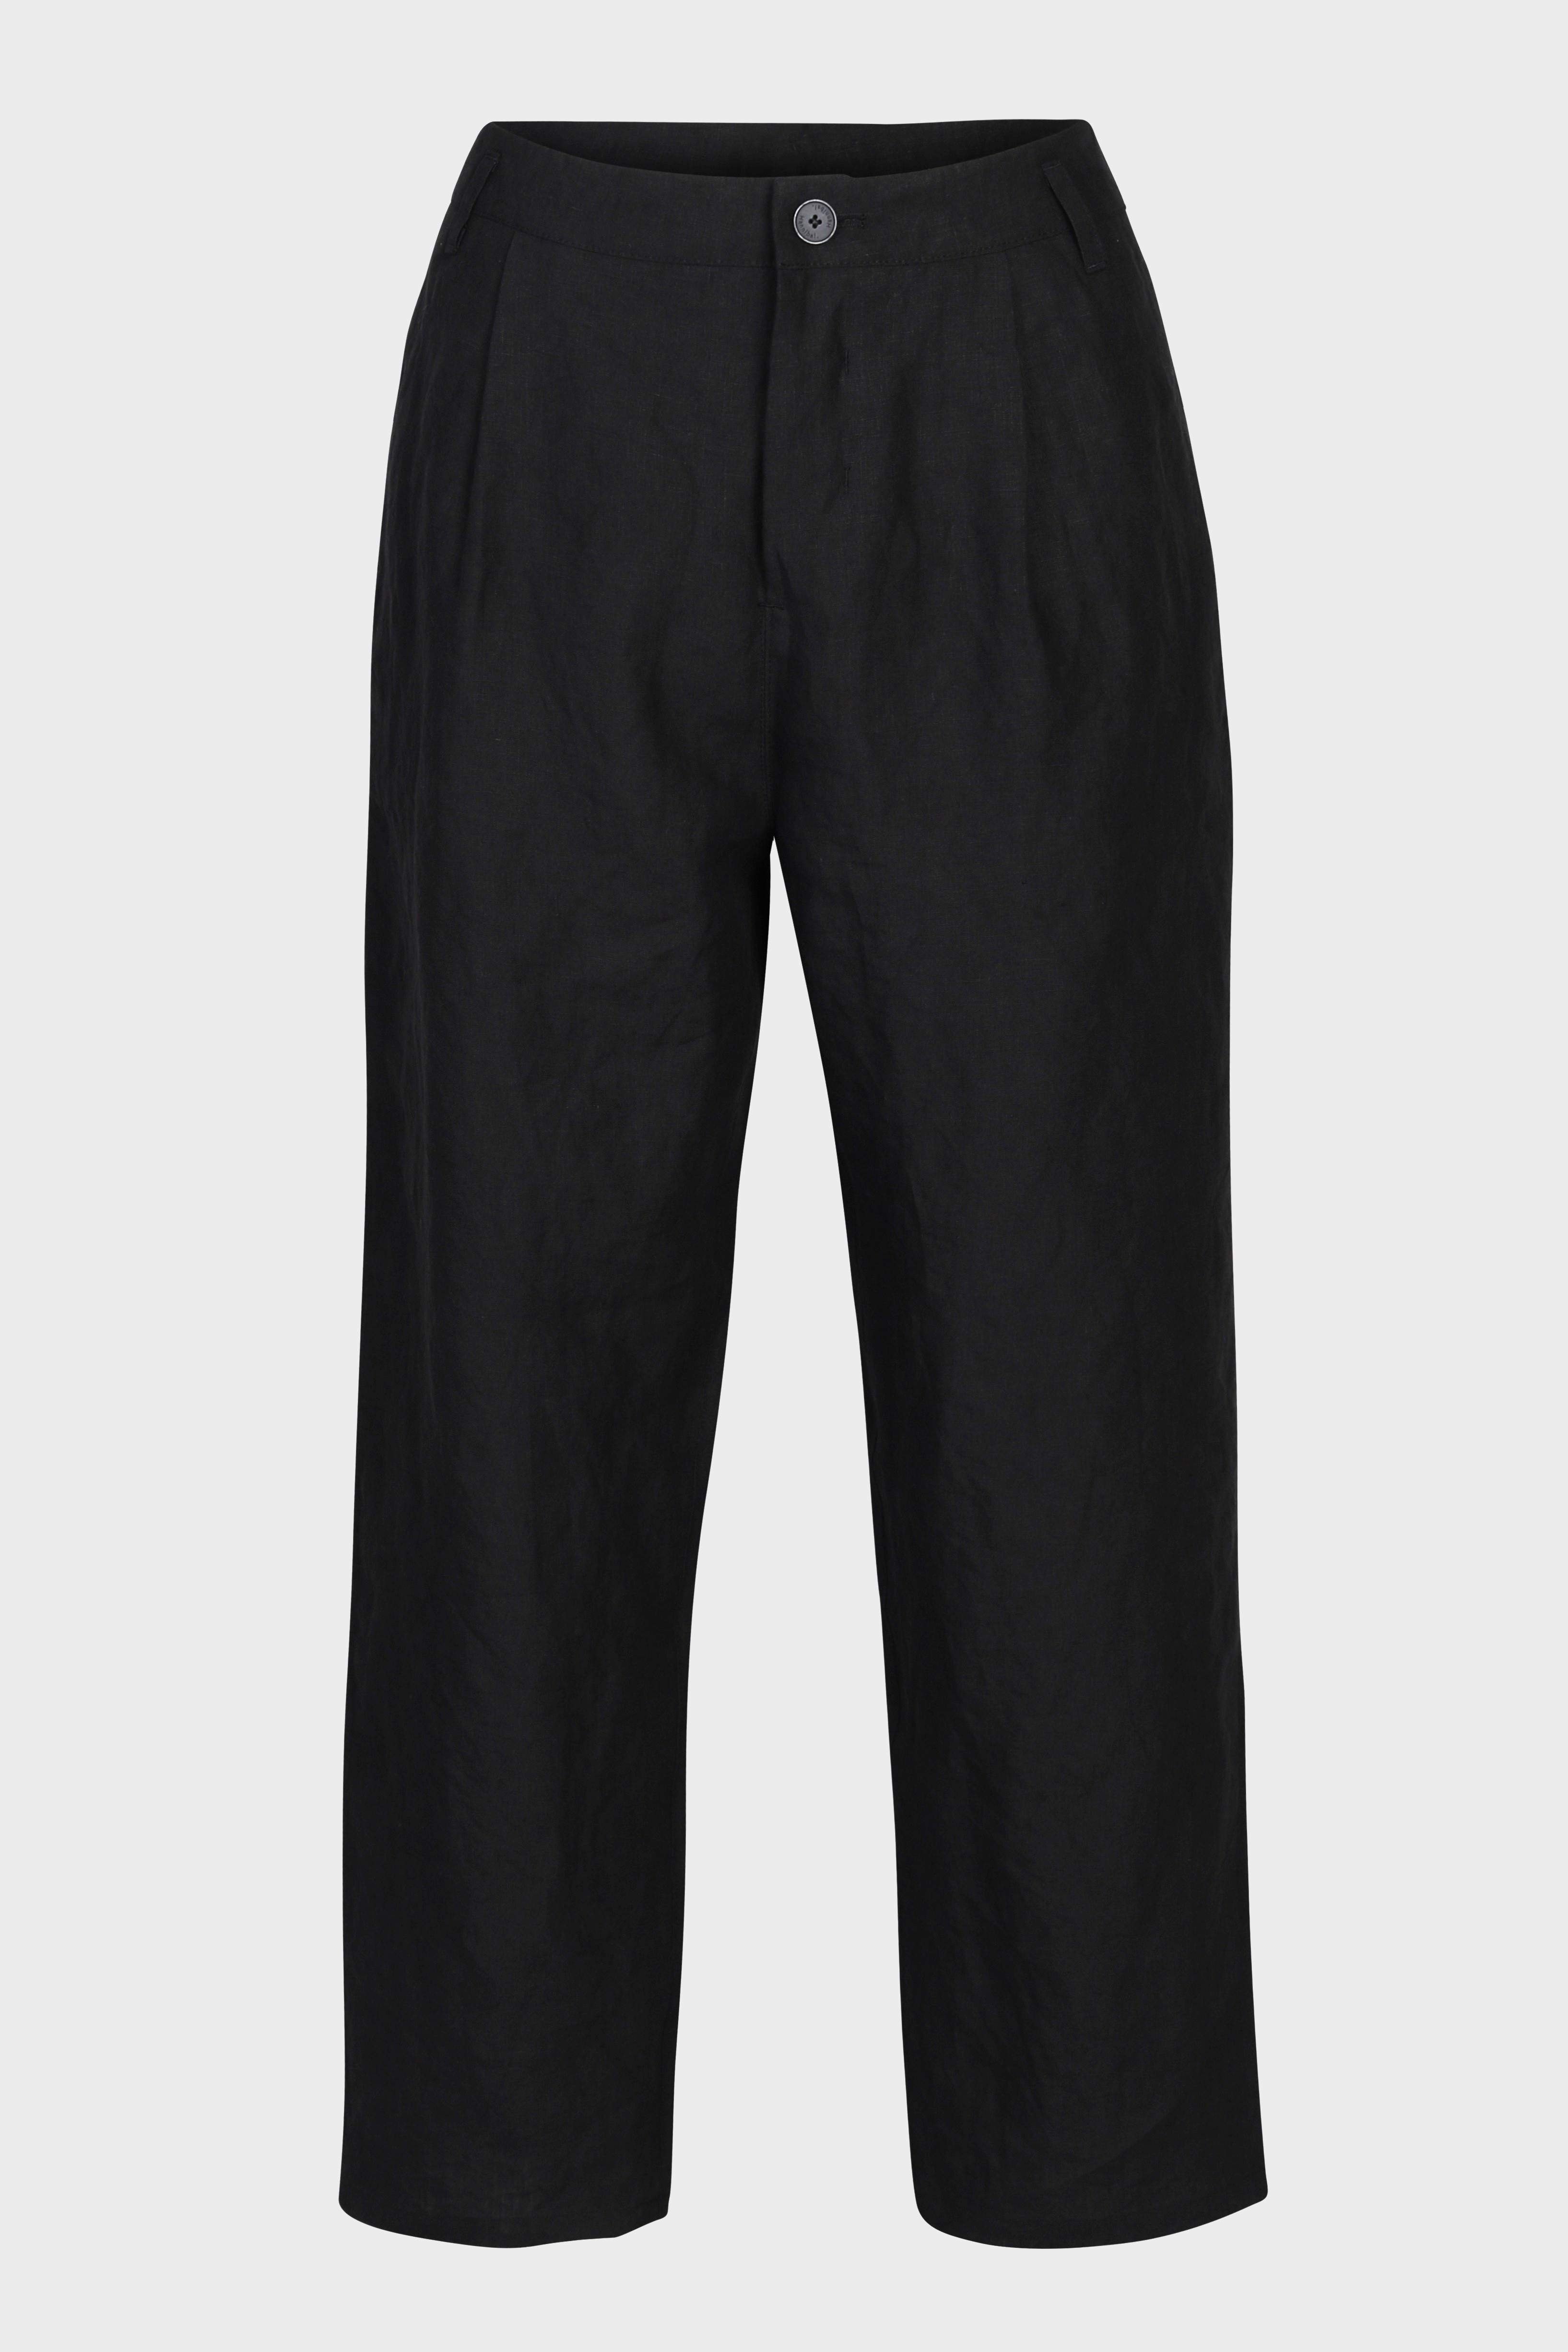 HANNIBAL. Trouser Heli in Washed Black 52